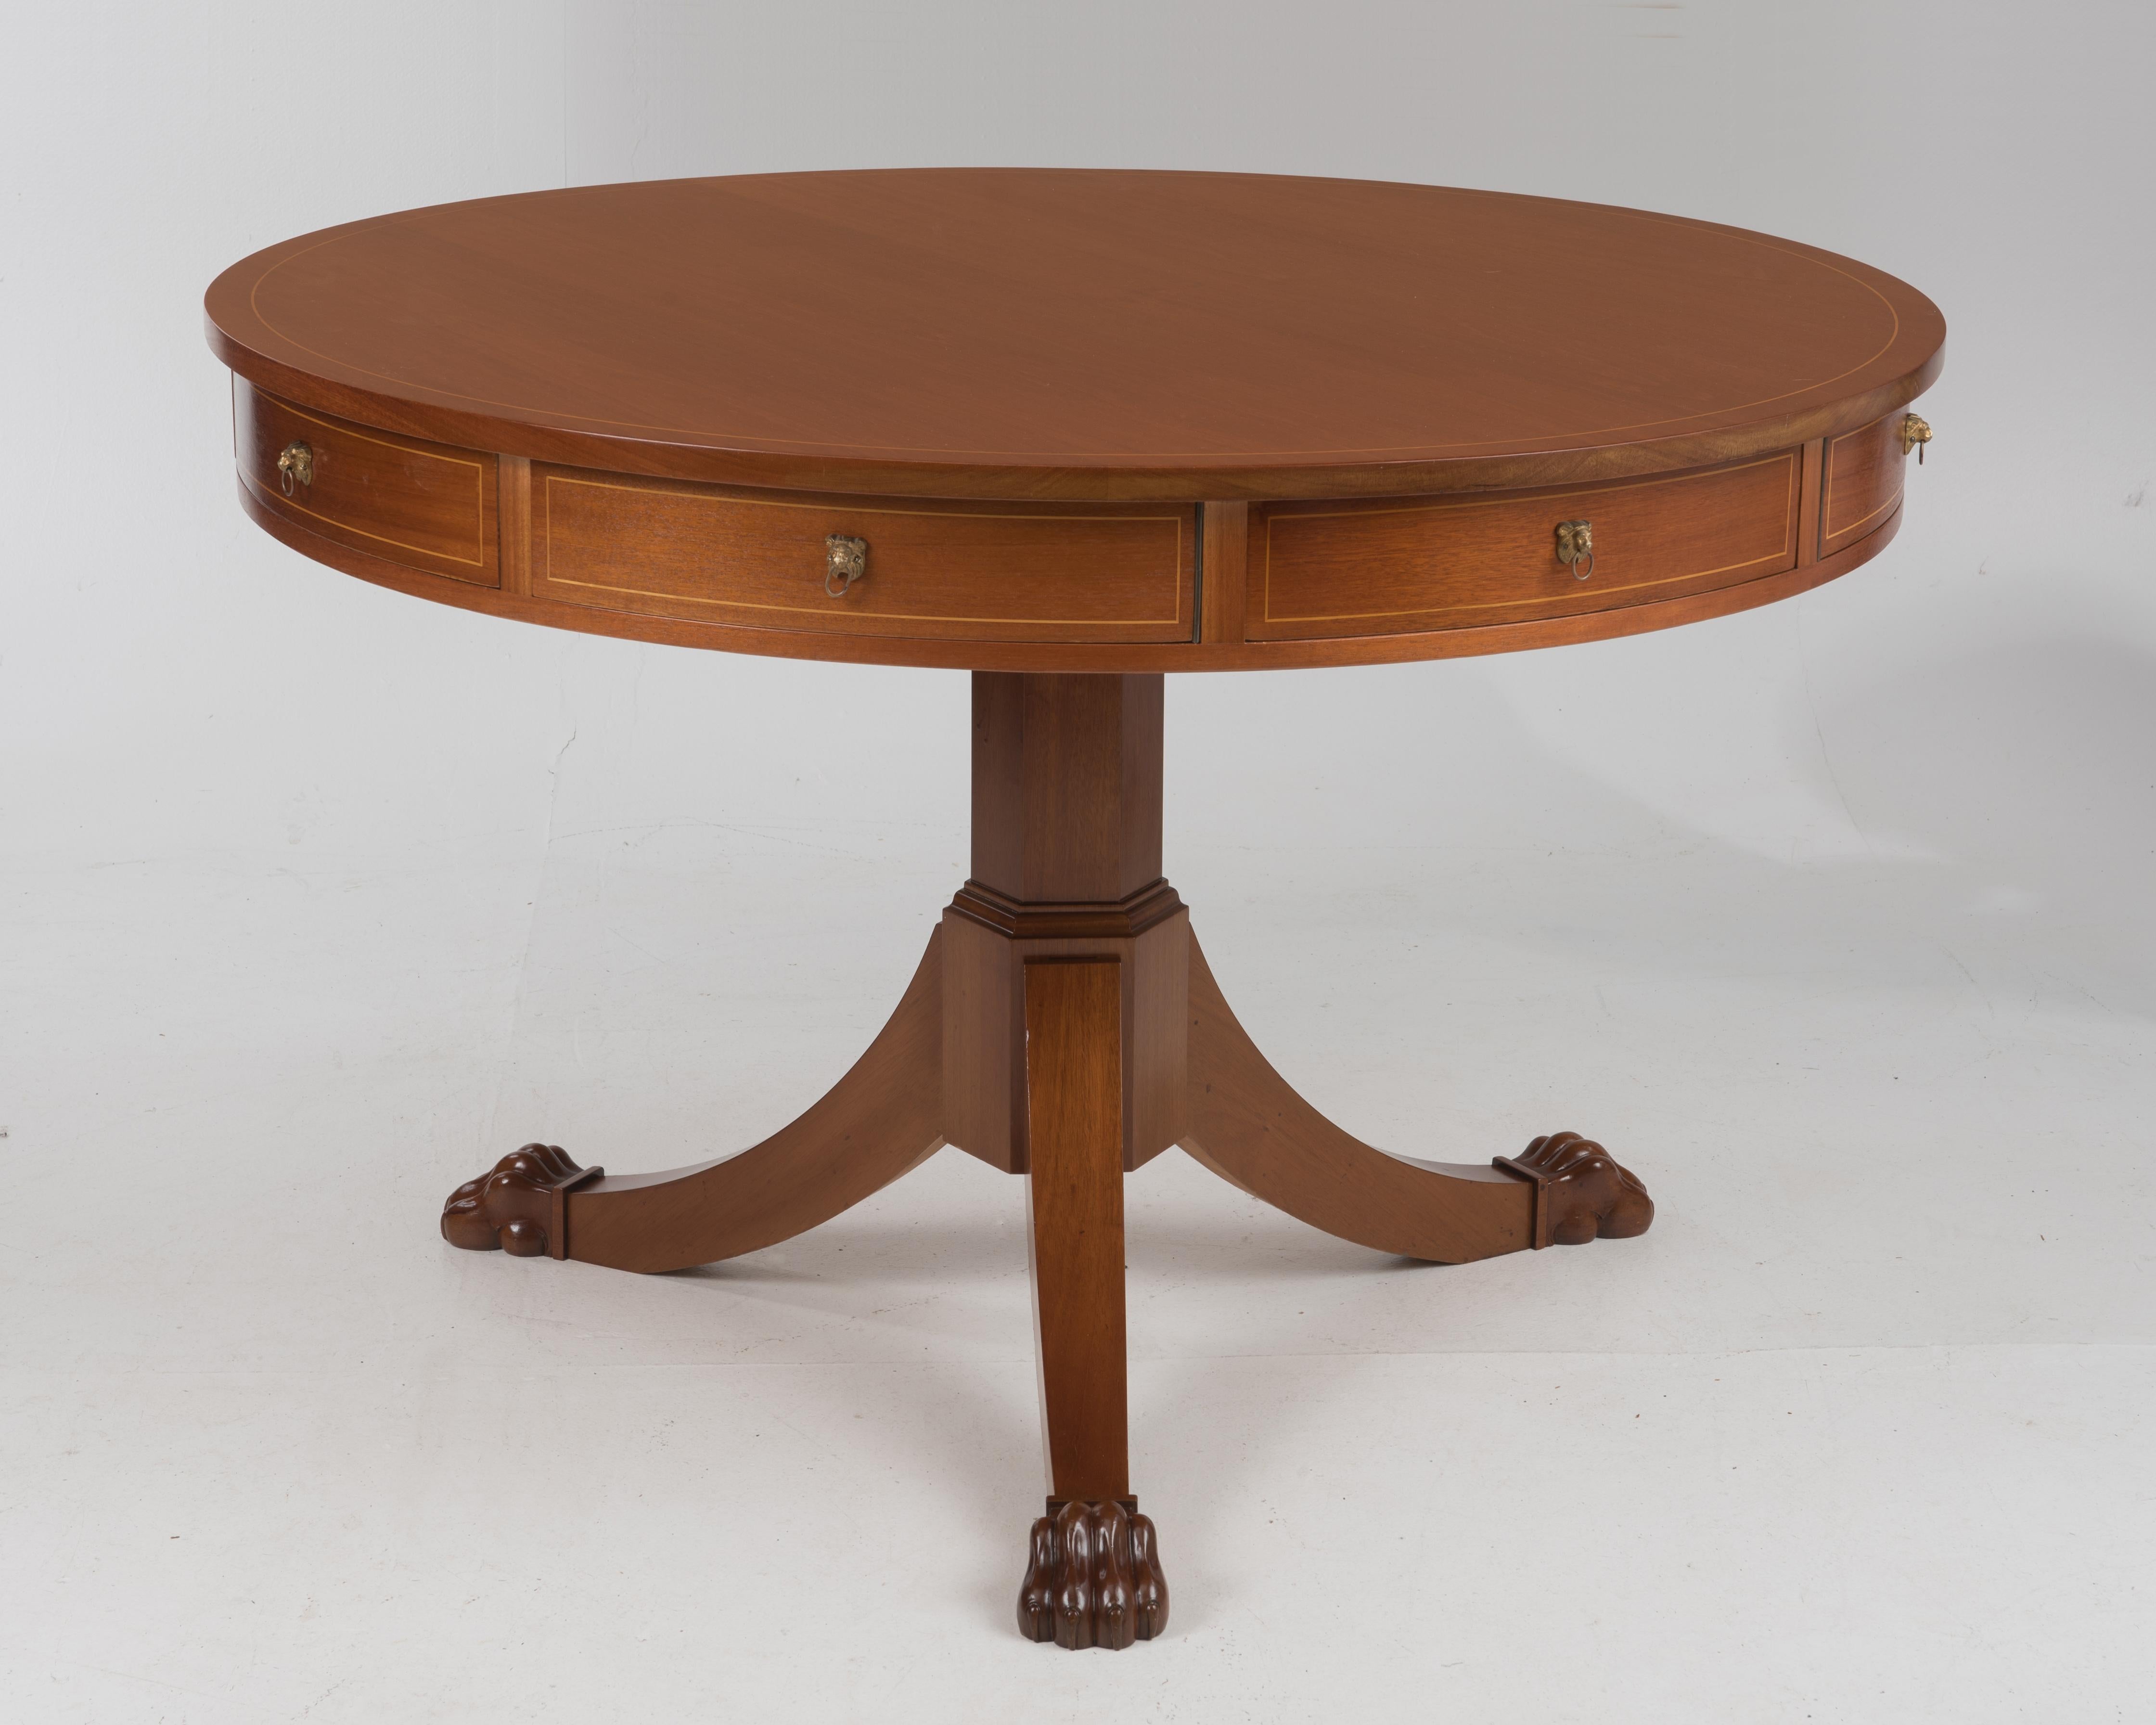 A well made 19th century rent table. Mahogany with paw feet. Purchased direct from an estate and we were told the table was purchased by a family member in Geneva 35 years ago. Leg clearance is 24